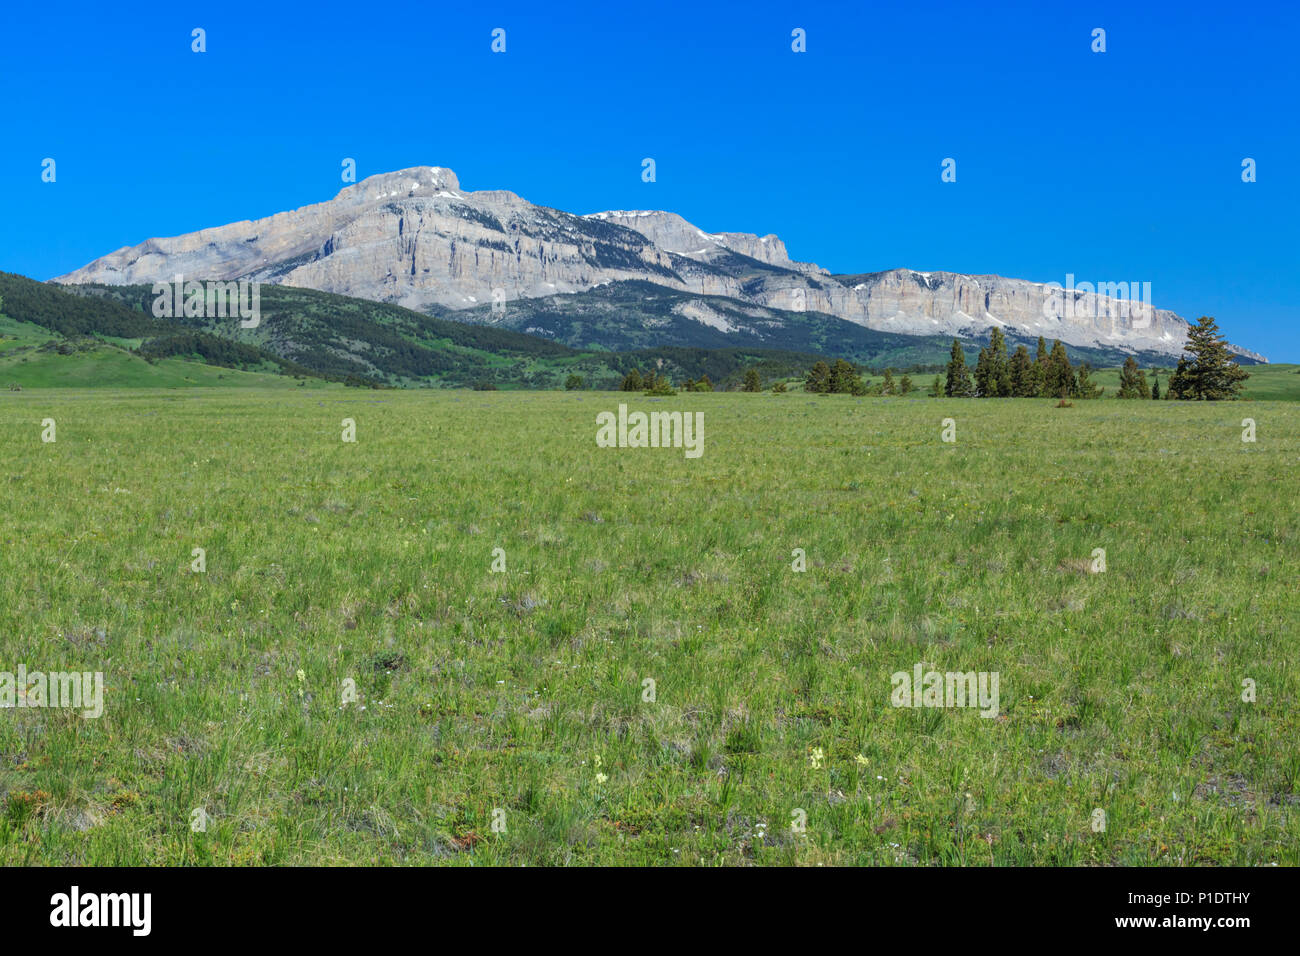 walling reef along the rocky mountain front above the prairie near bynum, montana Stock Photo